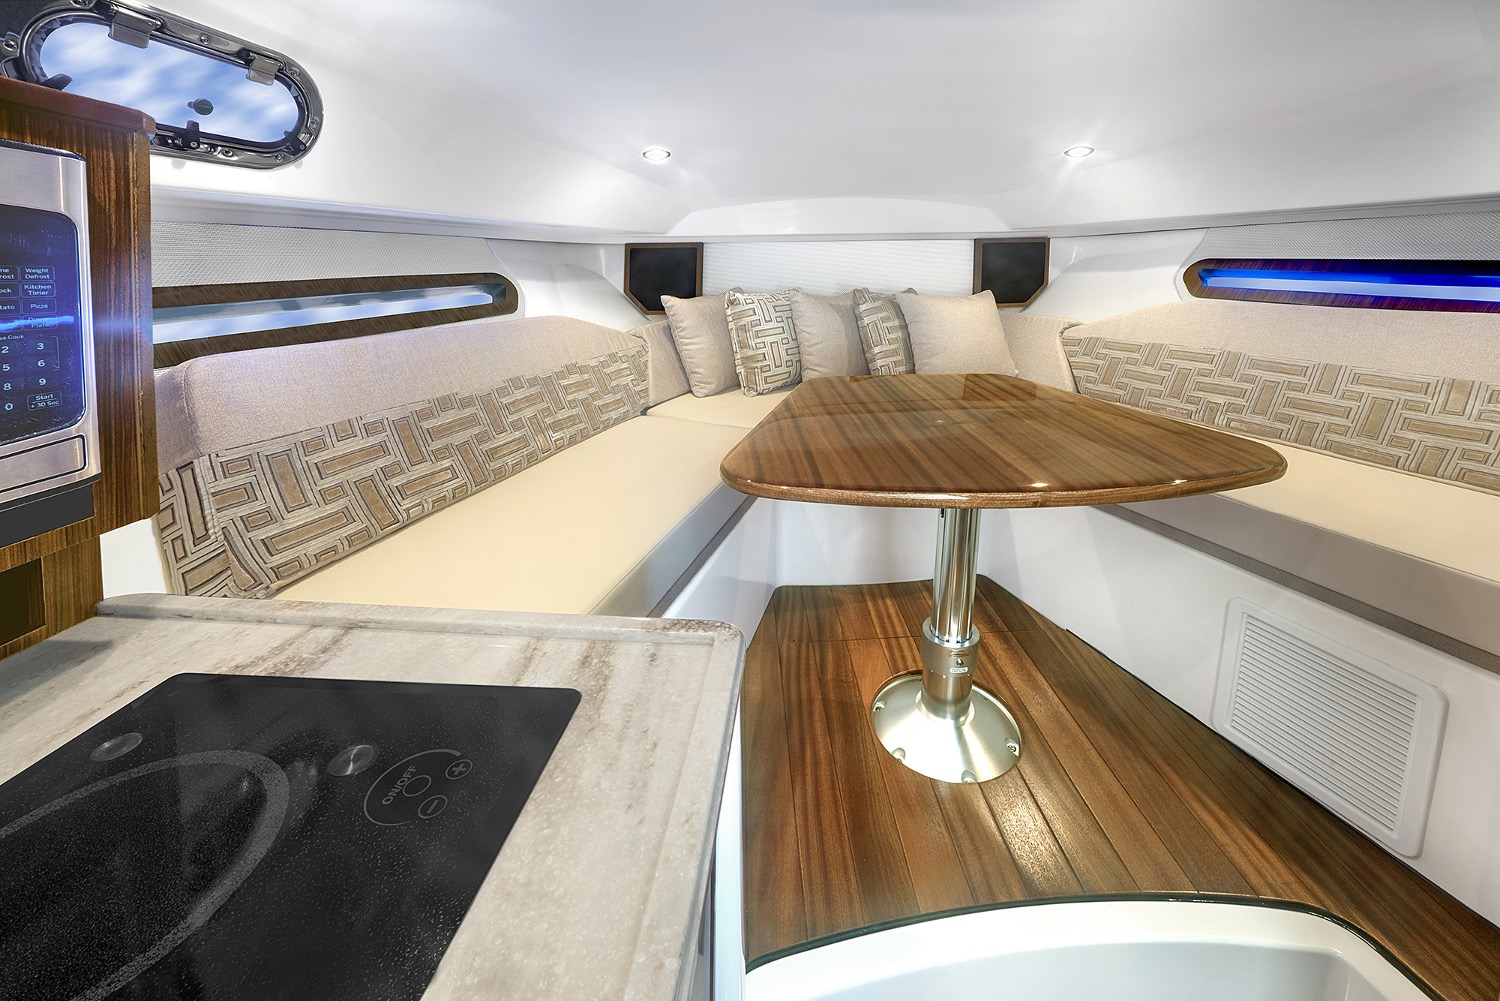 Offshore boats aren't usually known for luxury accommodation like this.